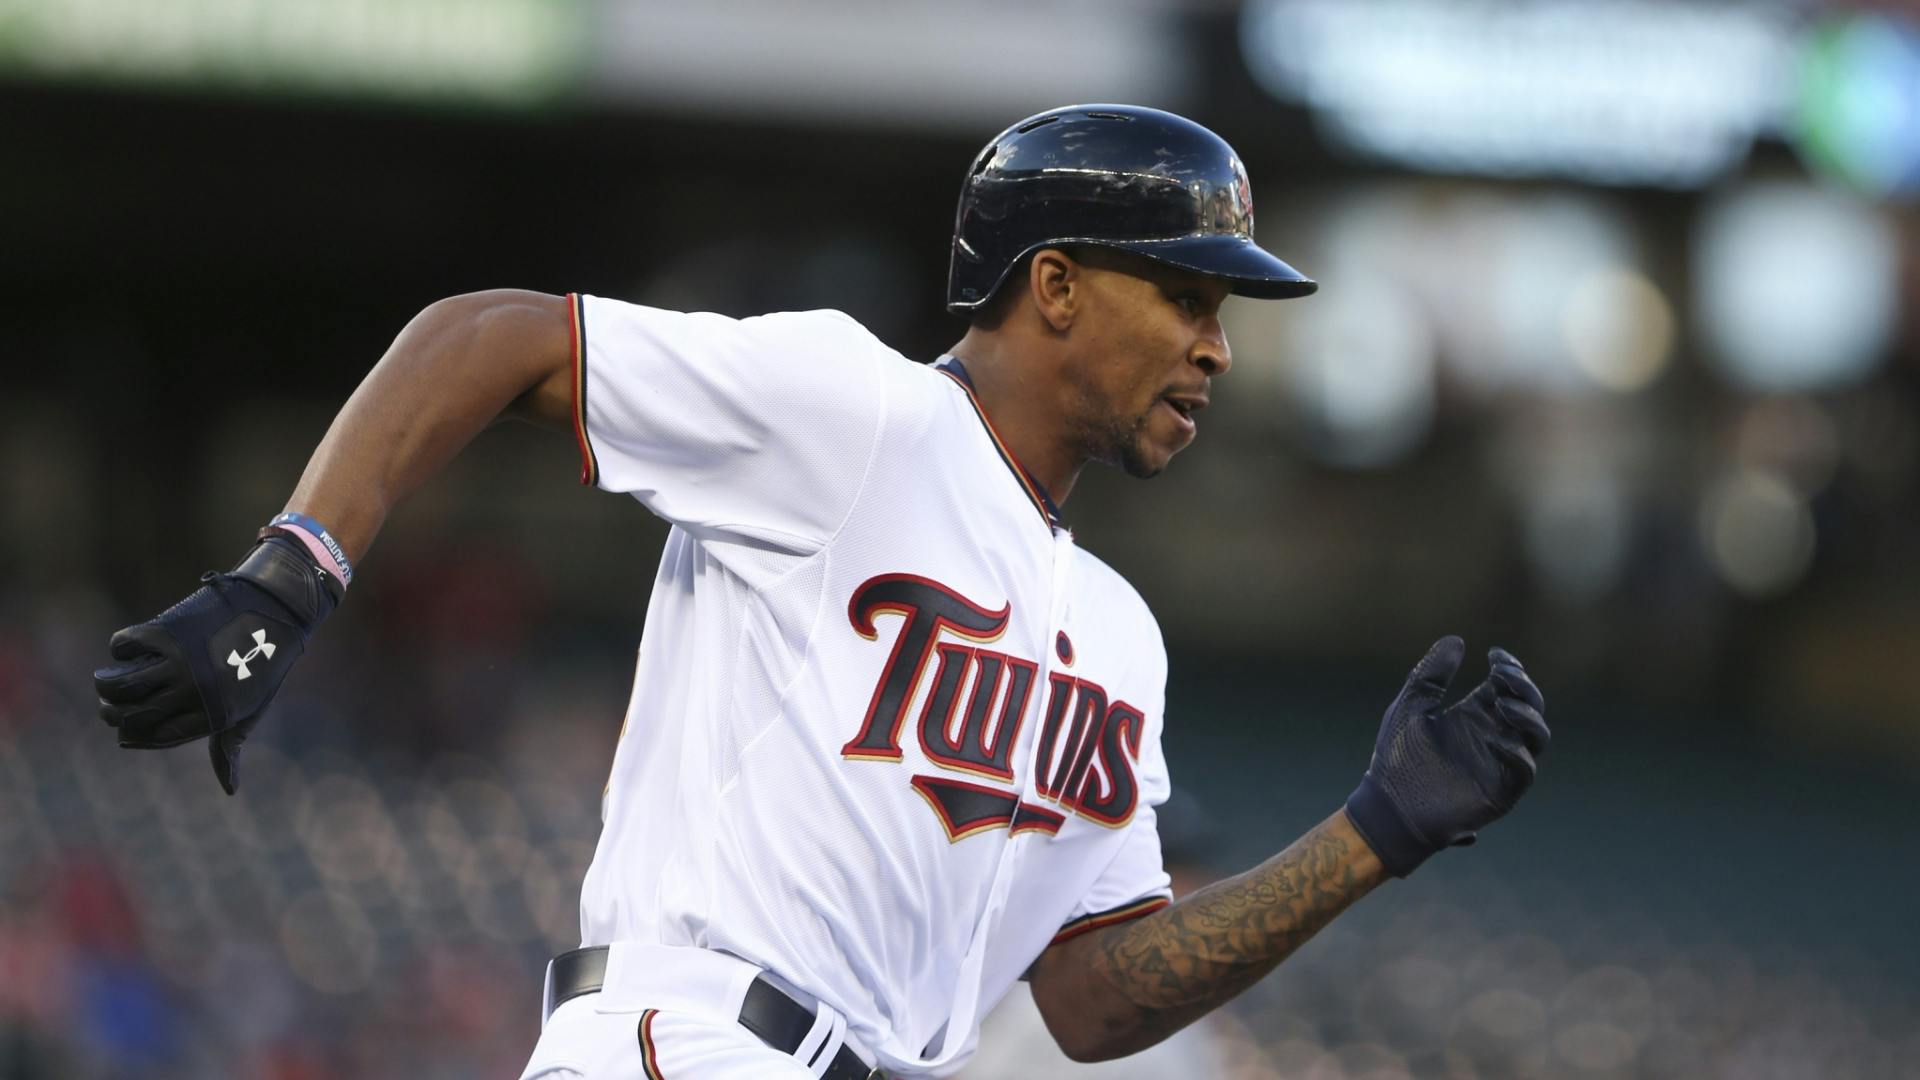 Twins rookie Byron Buxton says he was happy he could reward manager Paul Molitor's faith in him with three hits in the leadoff spot Monday.